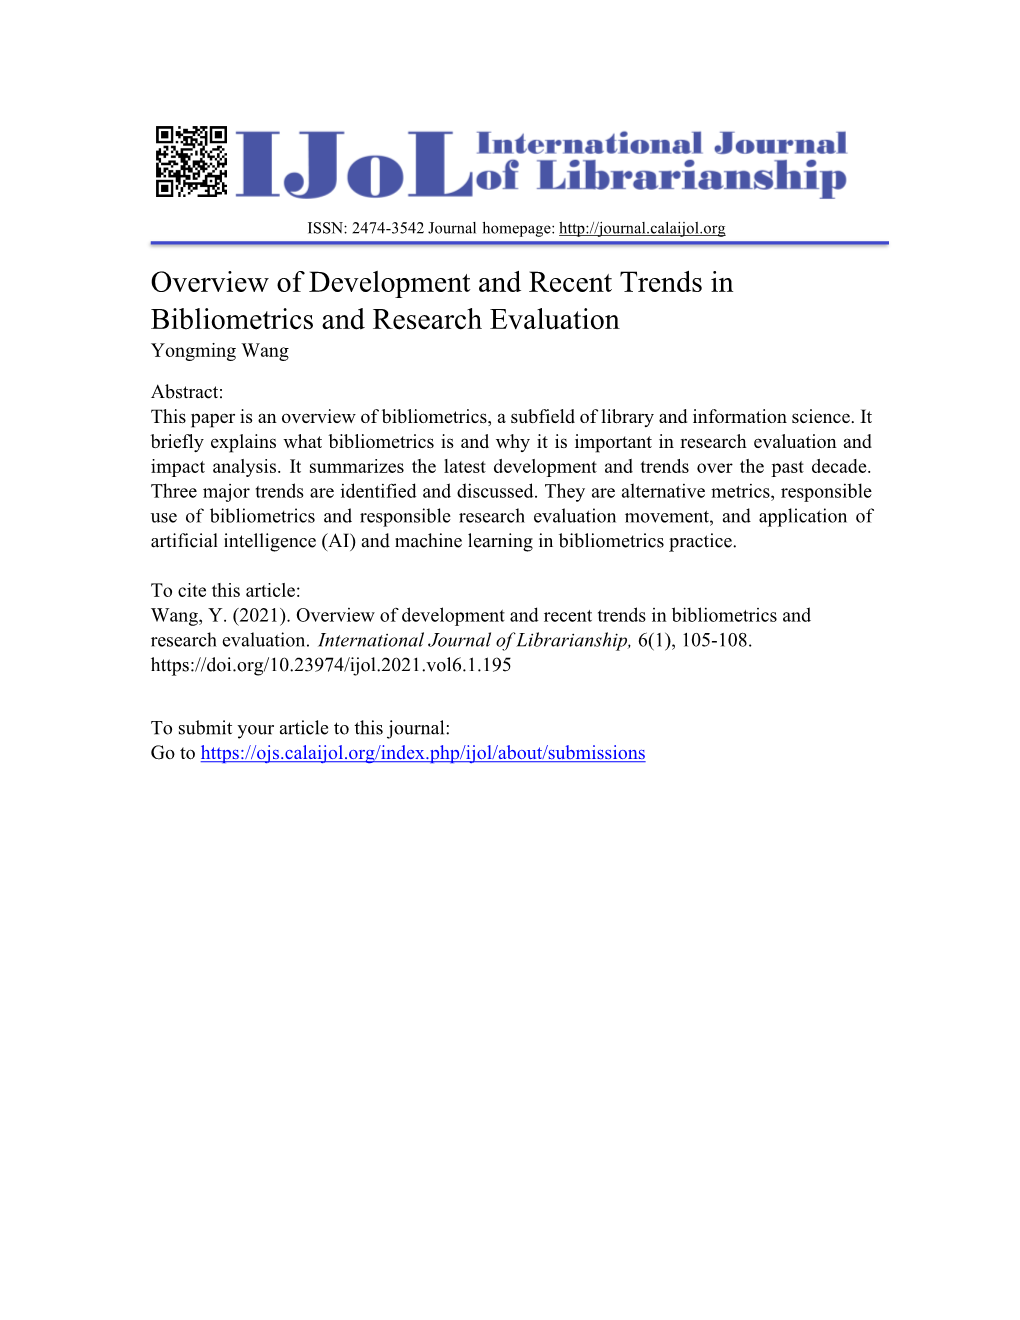 Overview of Development and Recent Trends in Bibliometrics and Research Evaluation Yongming Wang